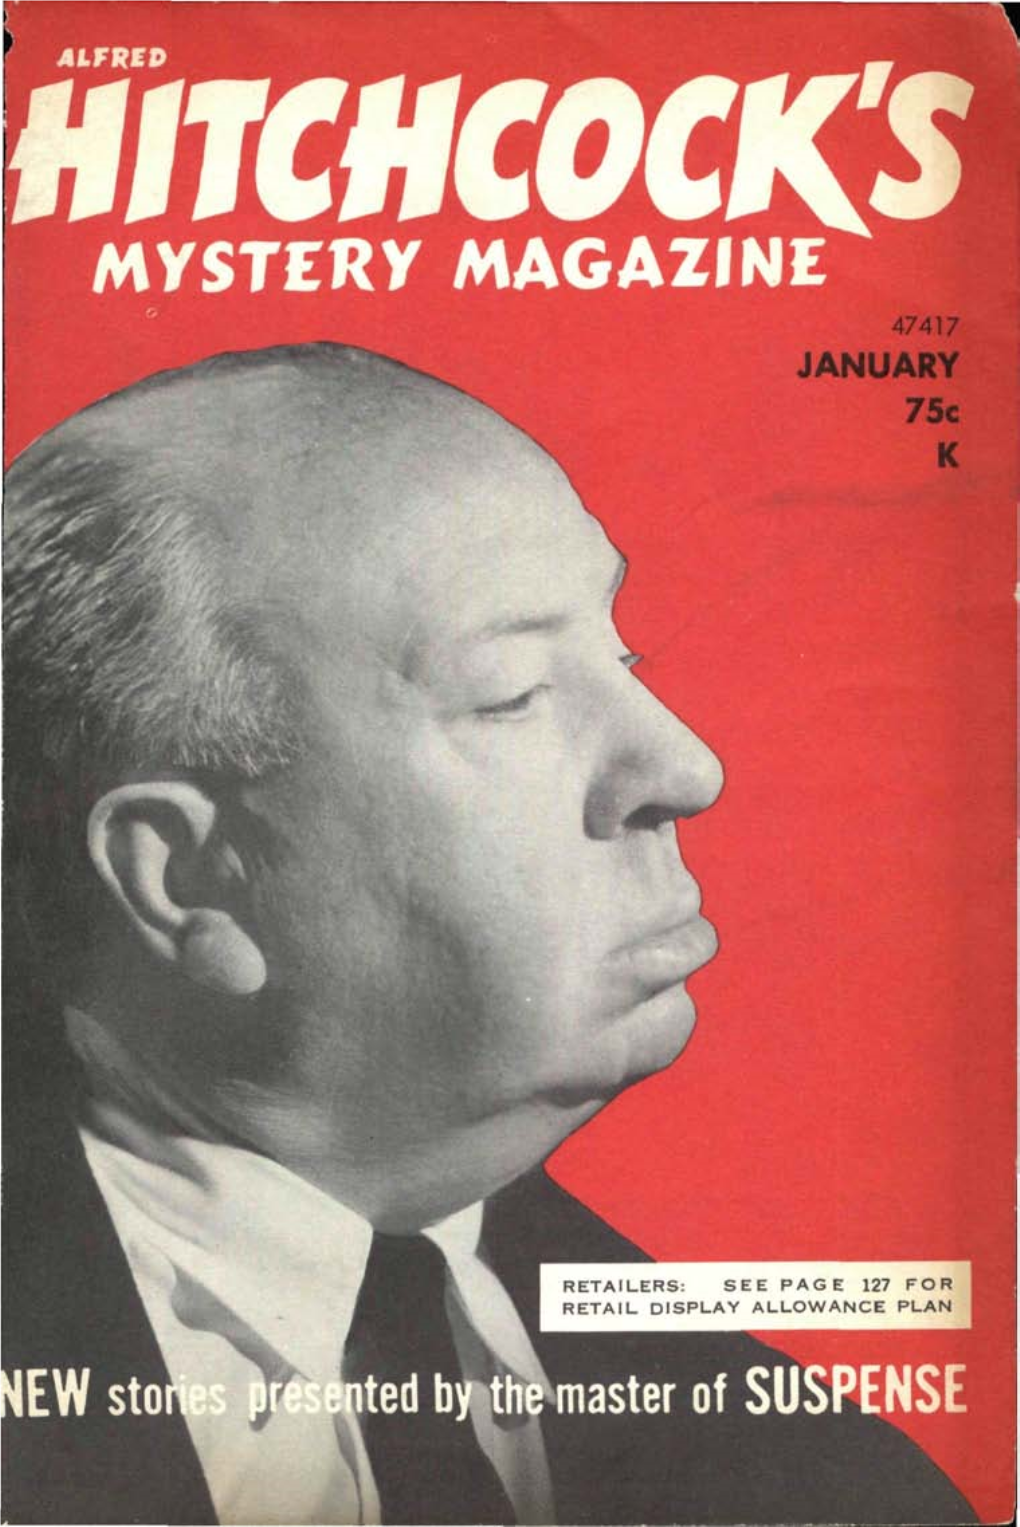 ALFRED HITCHCOCK's Mystery Magazine